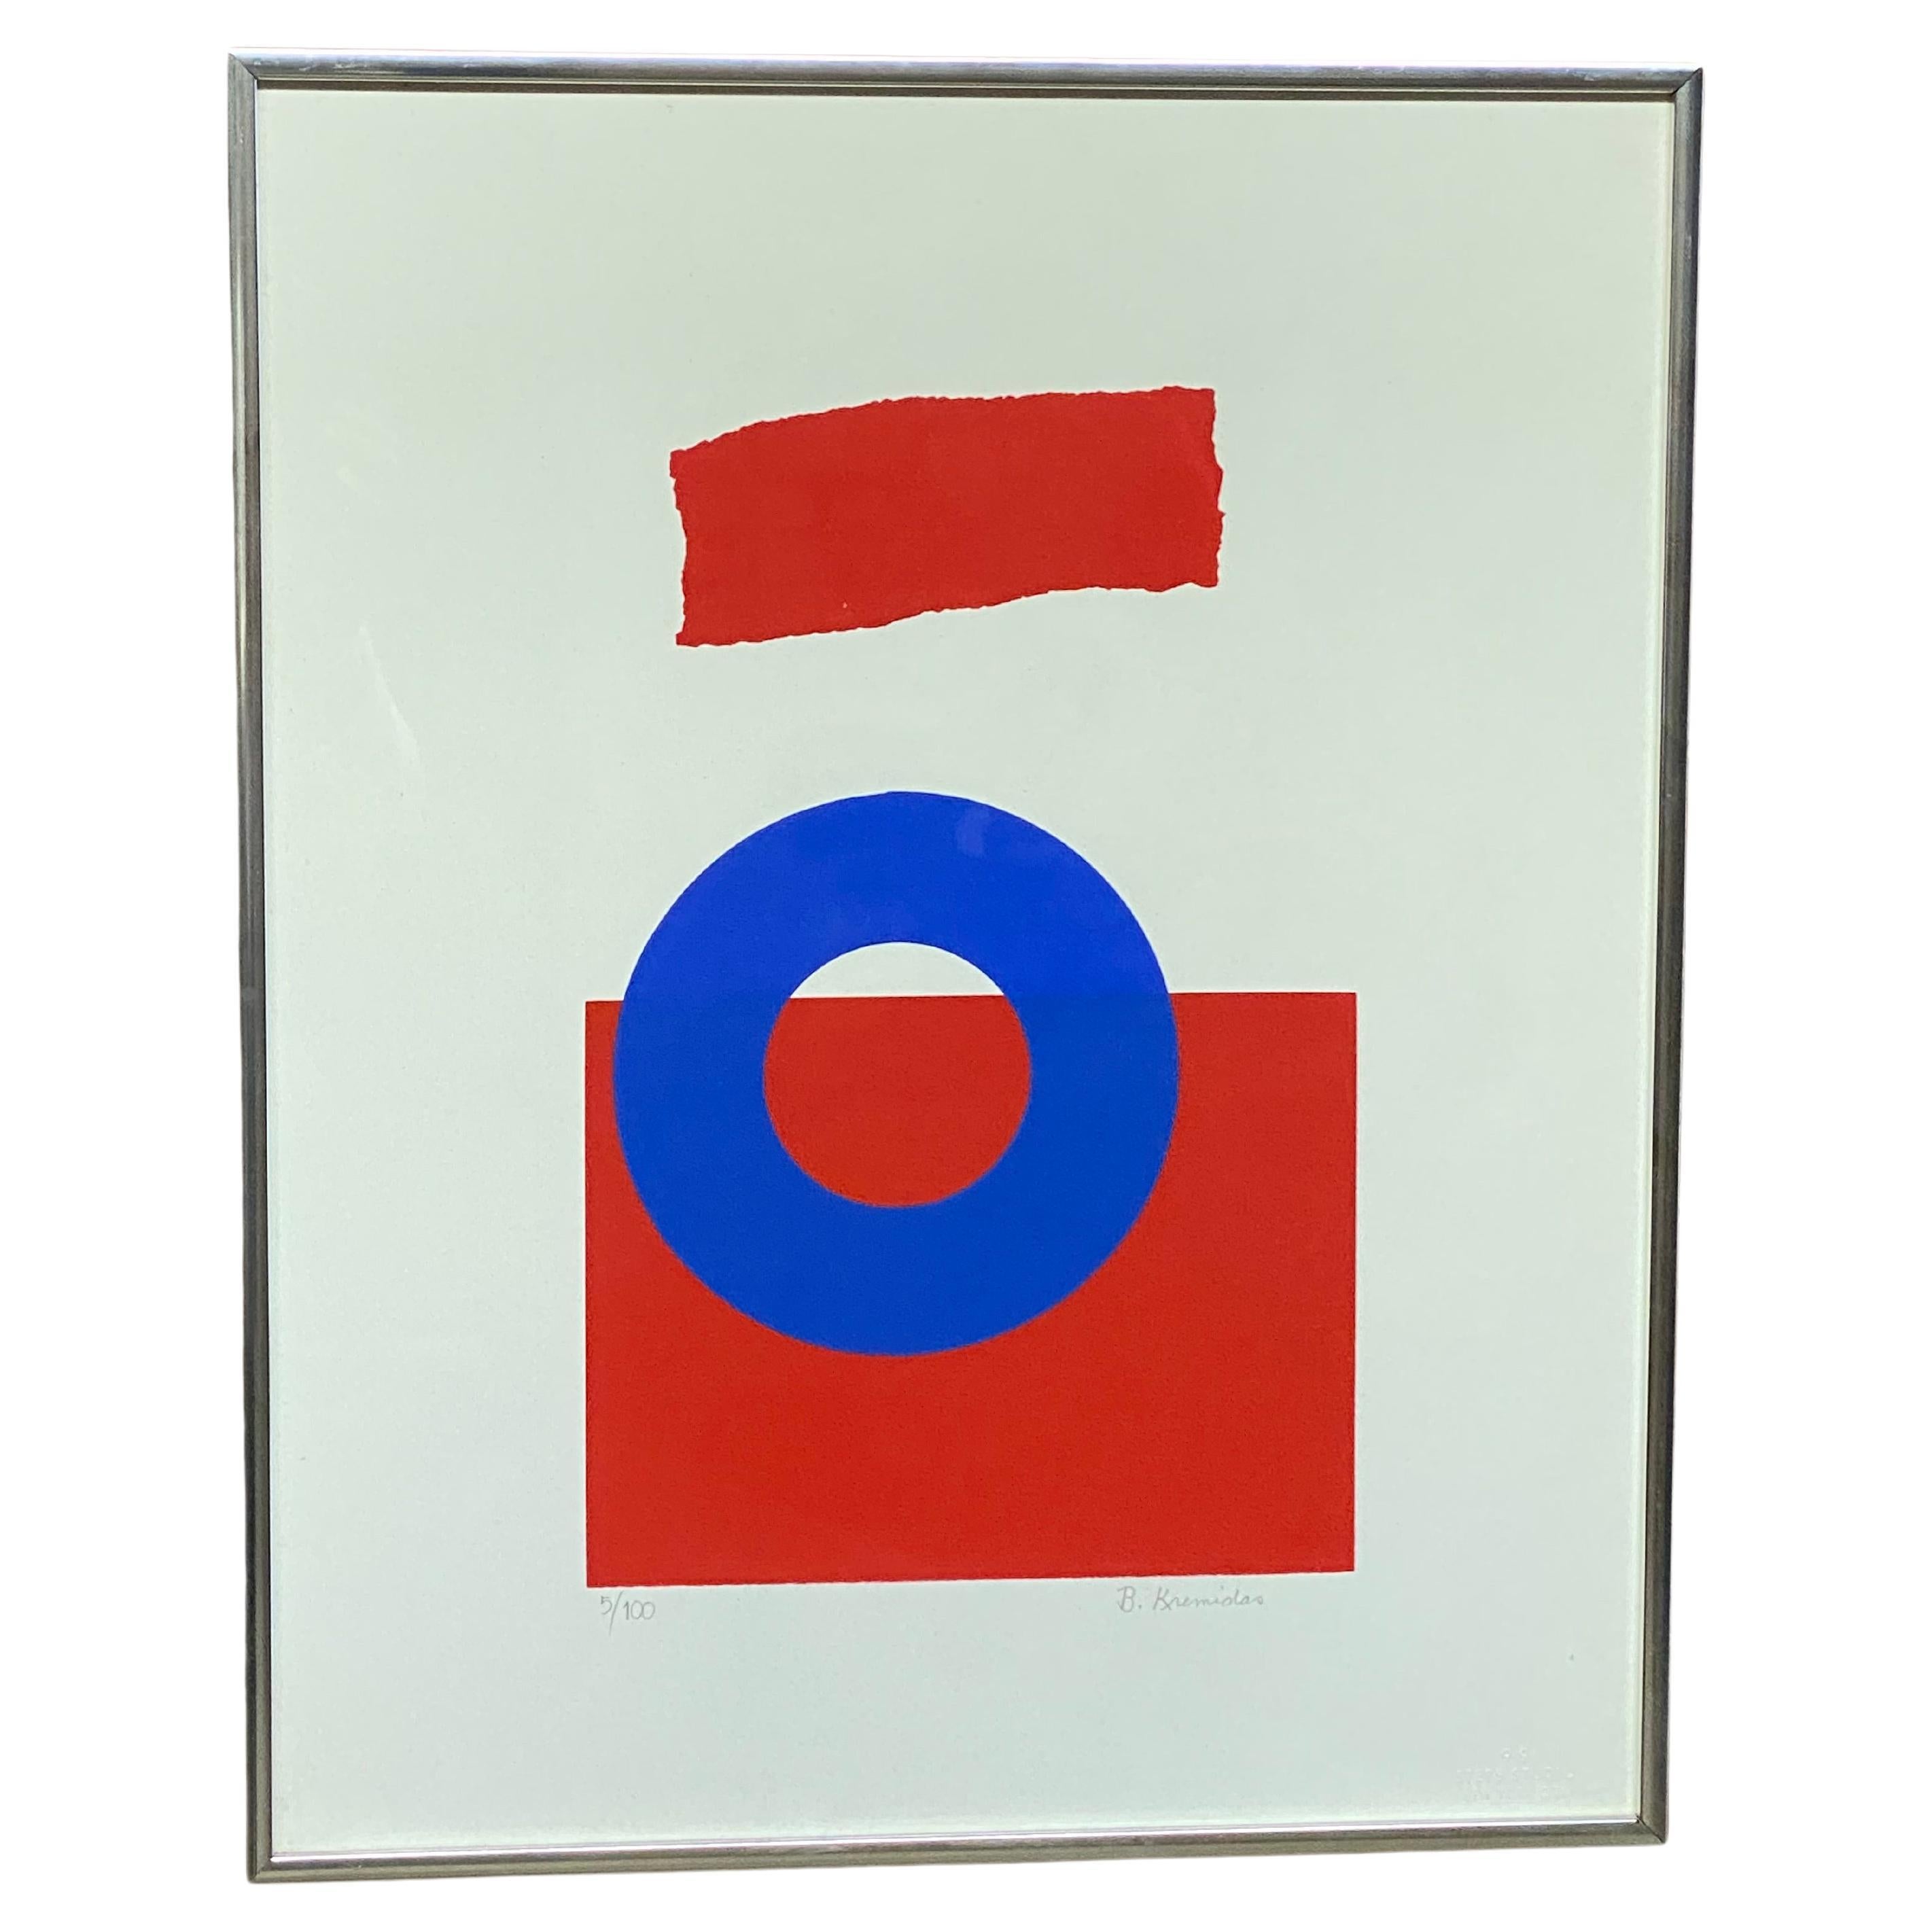 1970s Minimalist Abstract Red, White and Blue Lithograph